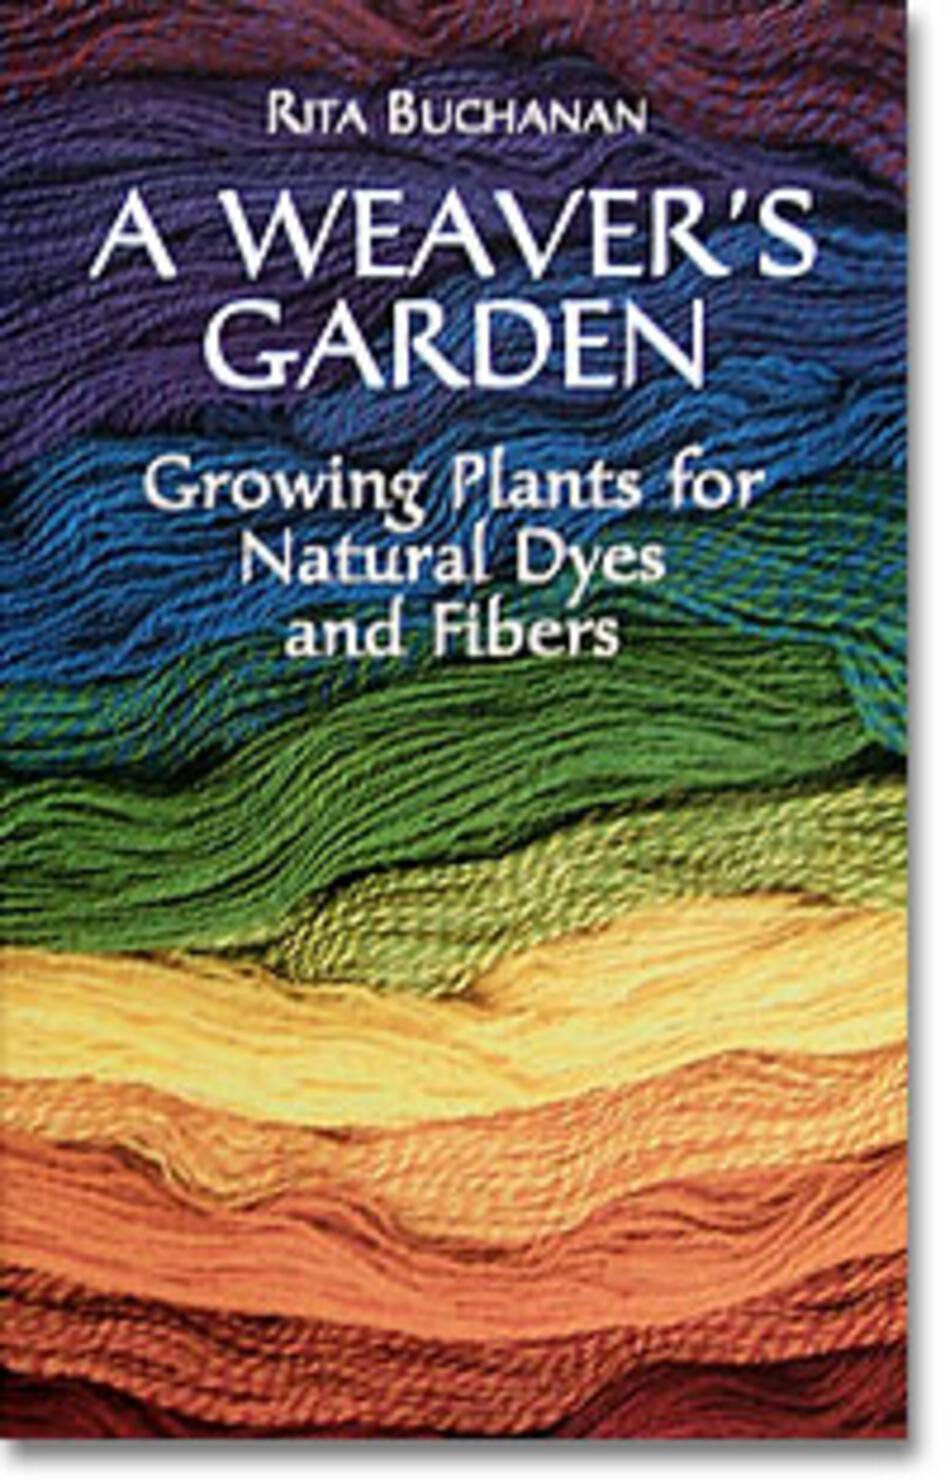 Dyeing Books A Weaveraposs Garden Growing Plants for Natural Dyes and Fibers